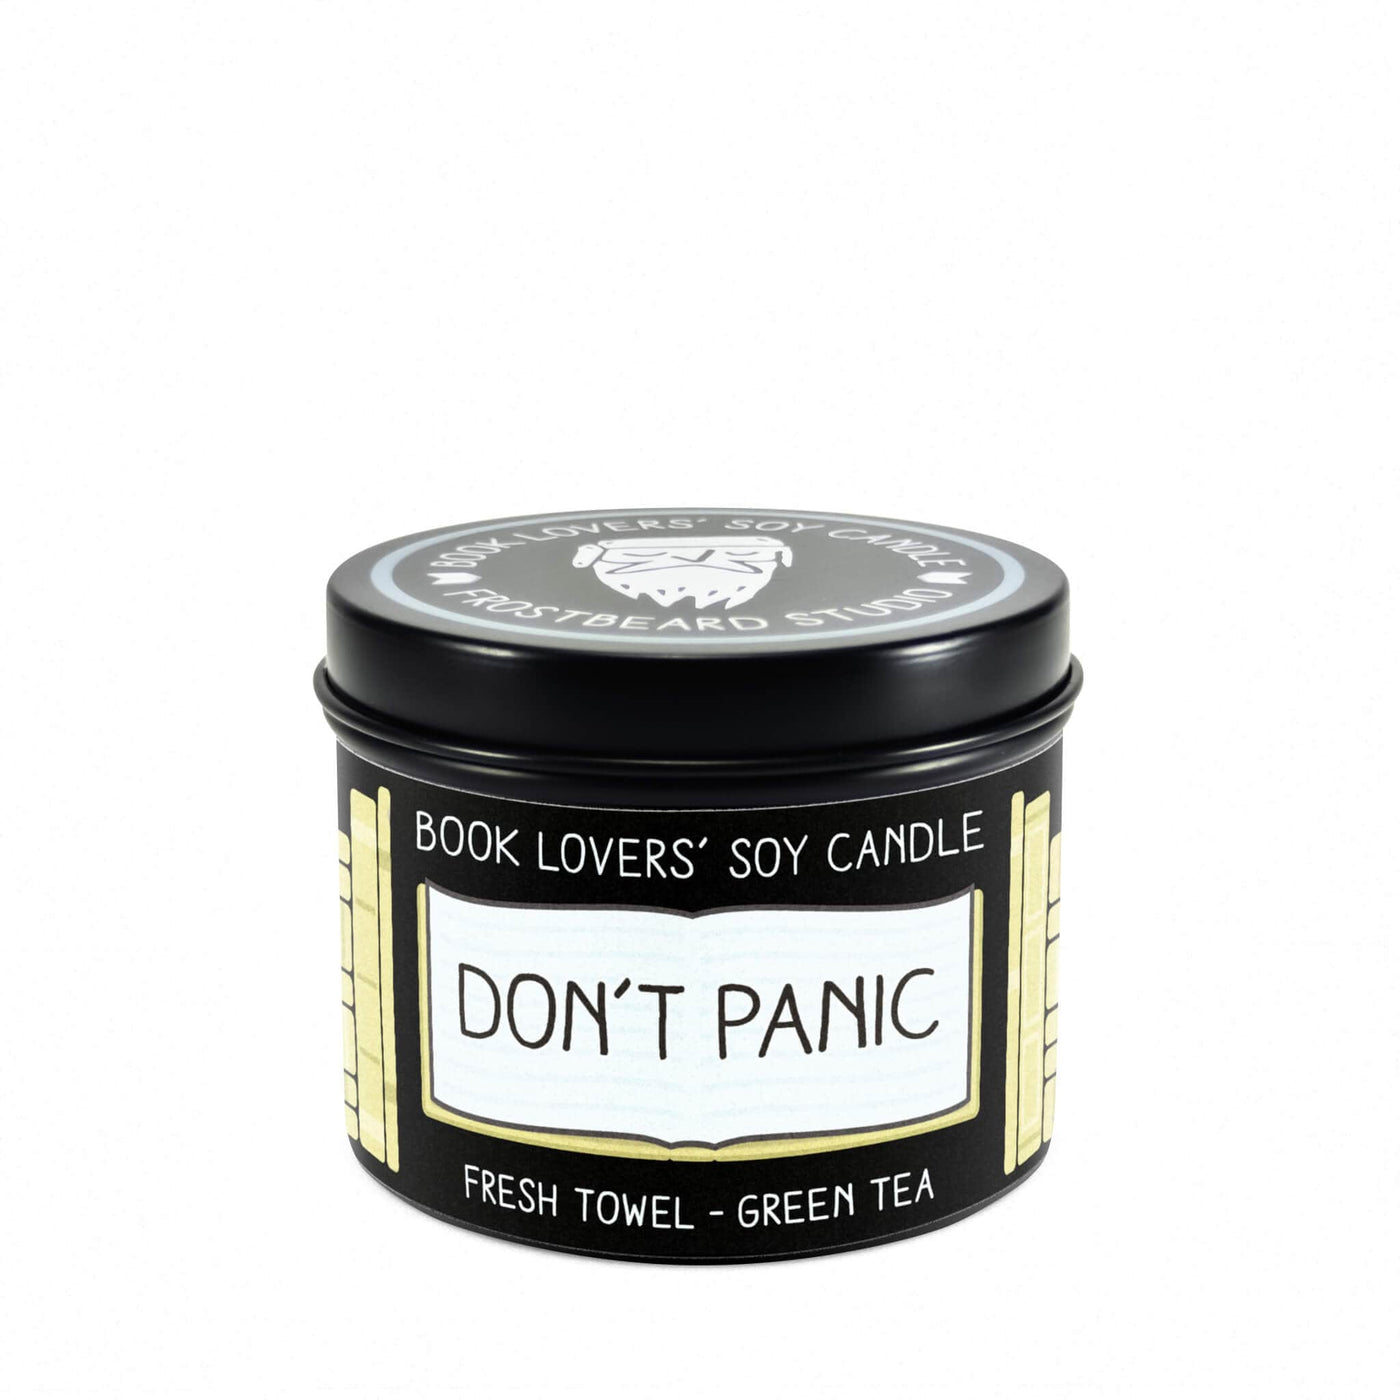 Don't Panic - 4 oz Tin - Book Lovers' Soy Candle - Frostbeard Studio